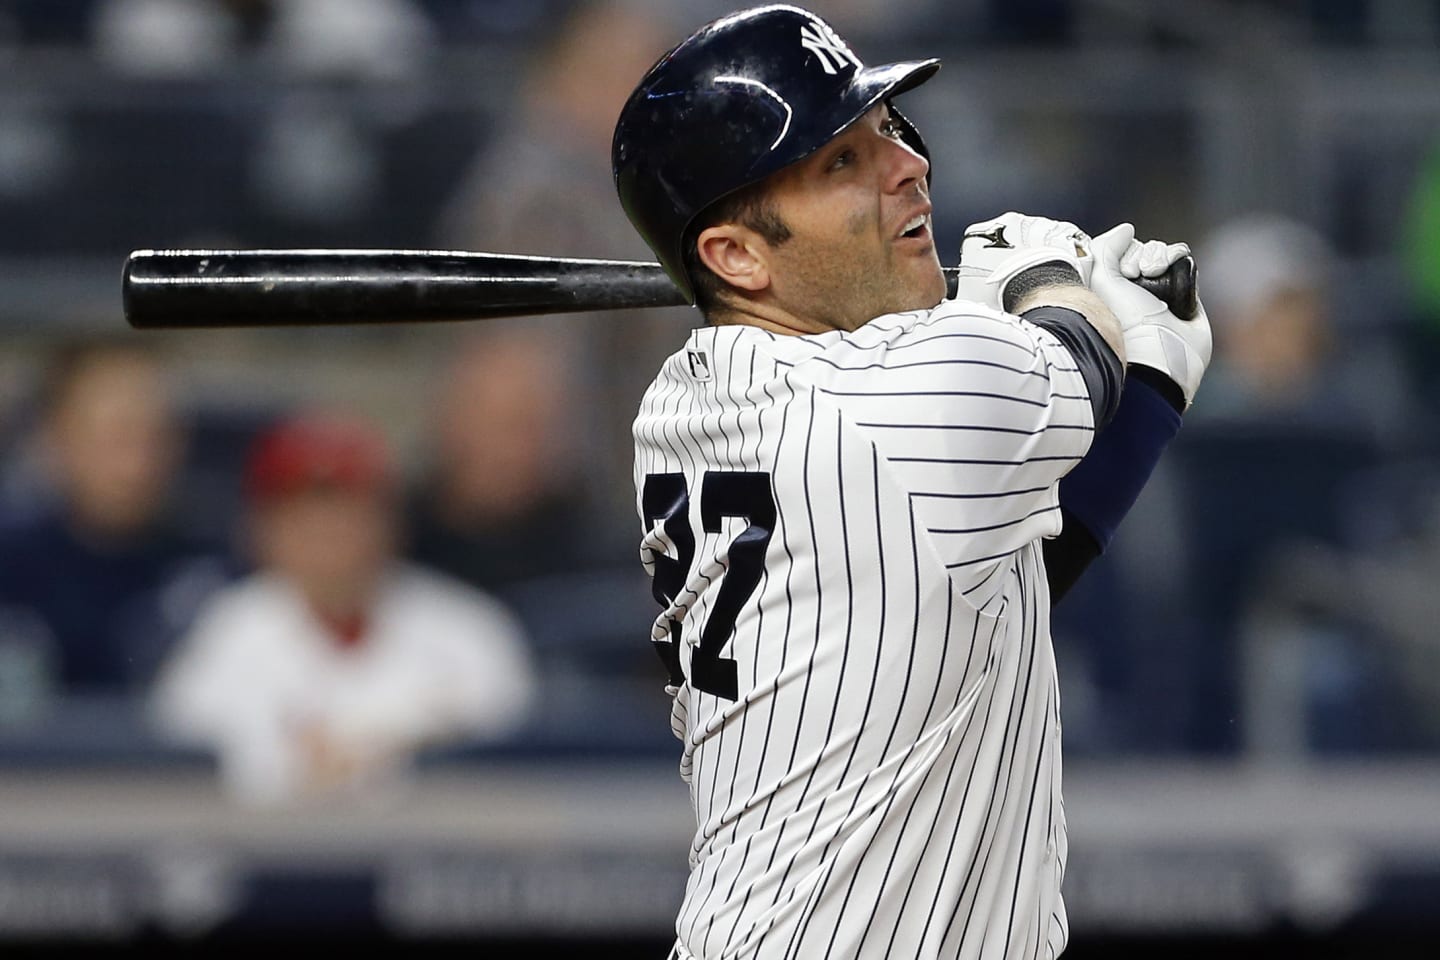 Cubs roster move: Austin Romine to injured list, Tony Wolters